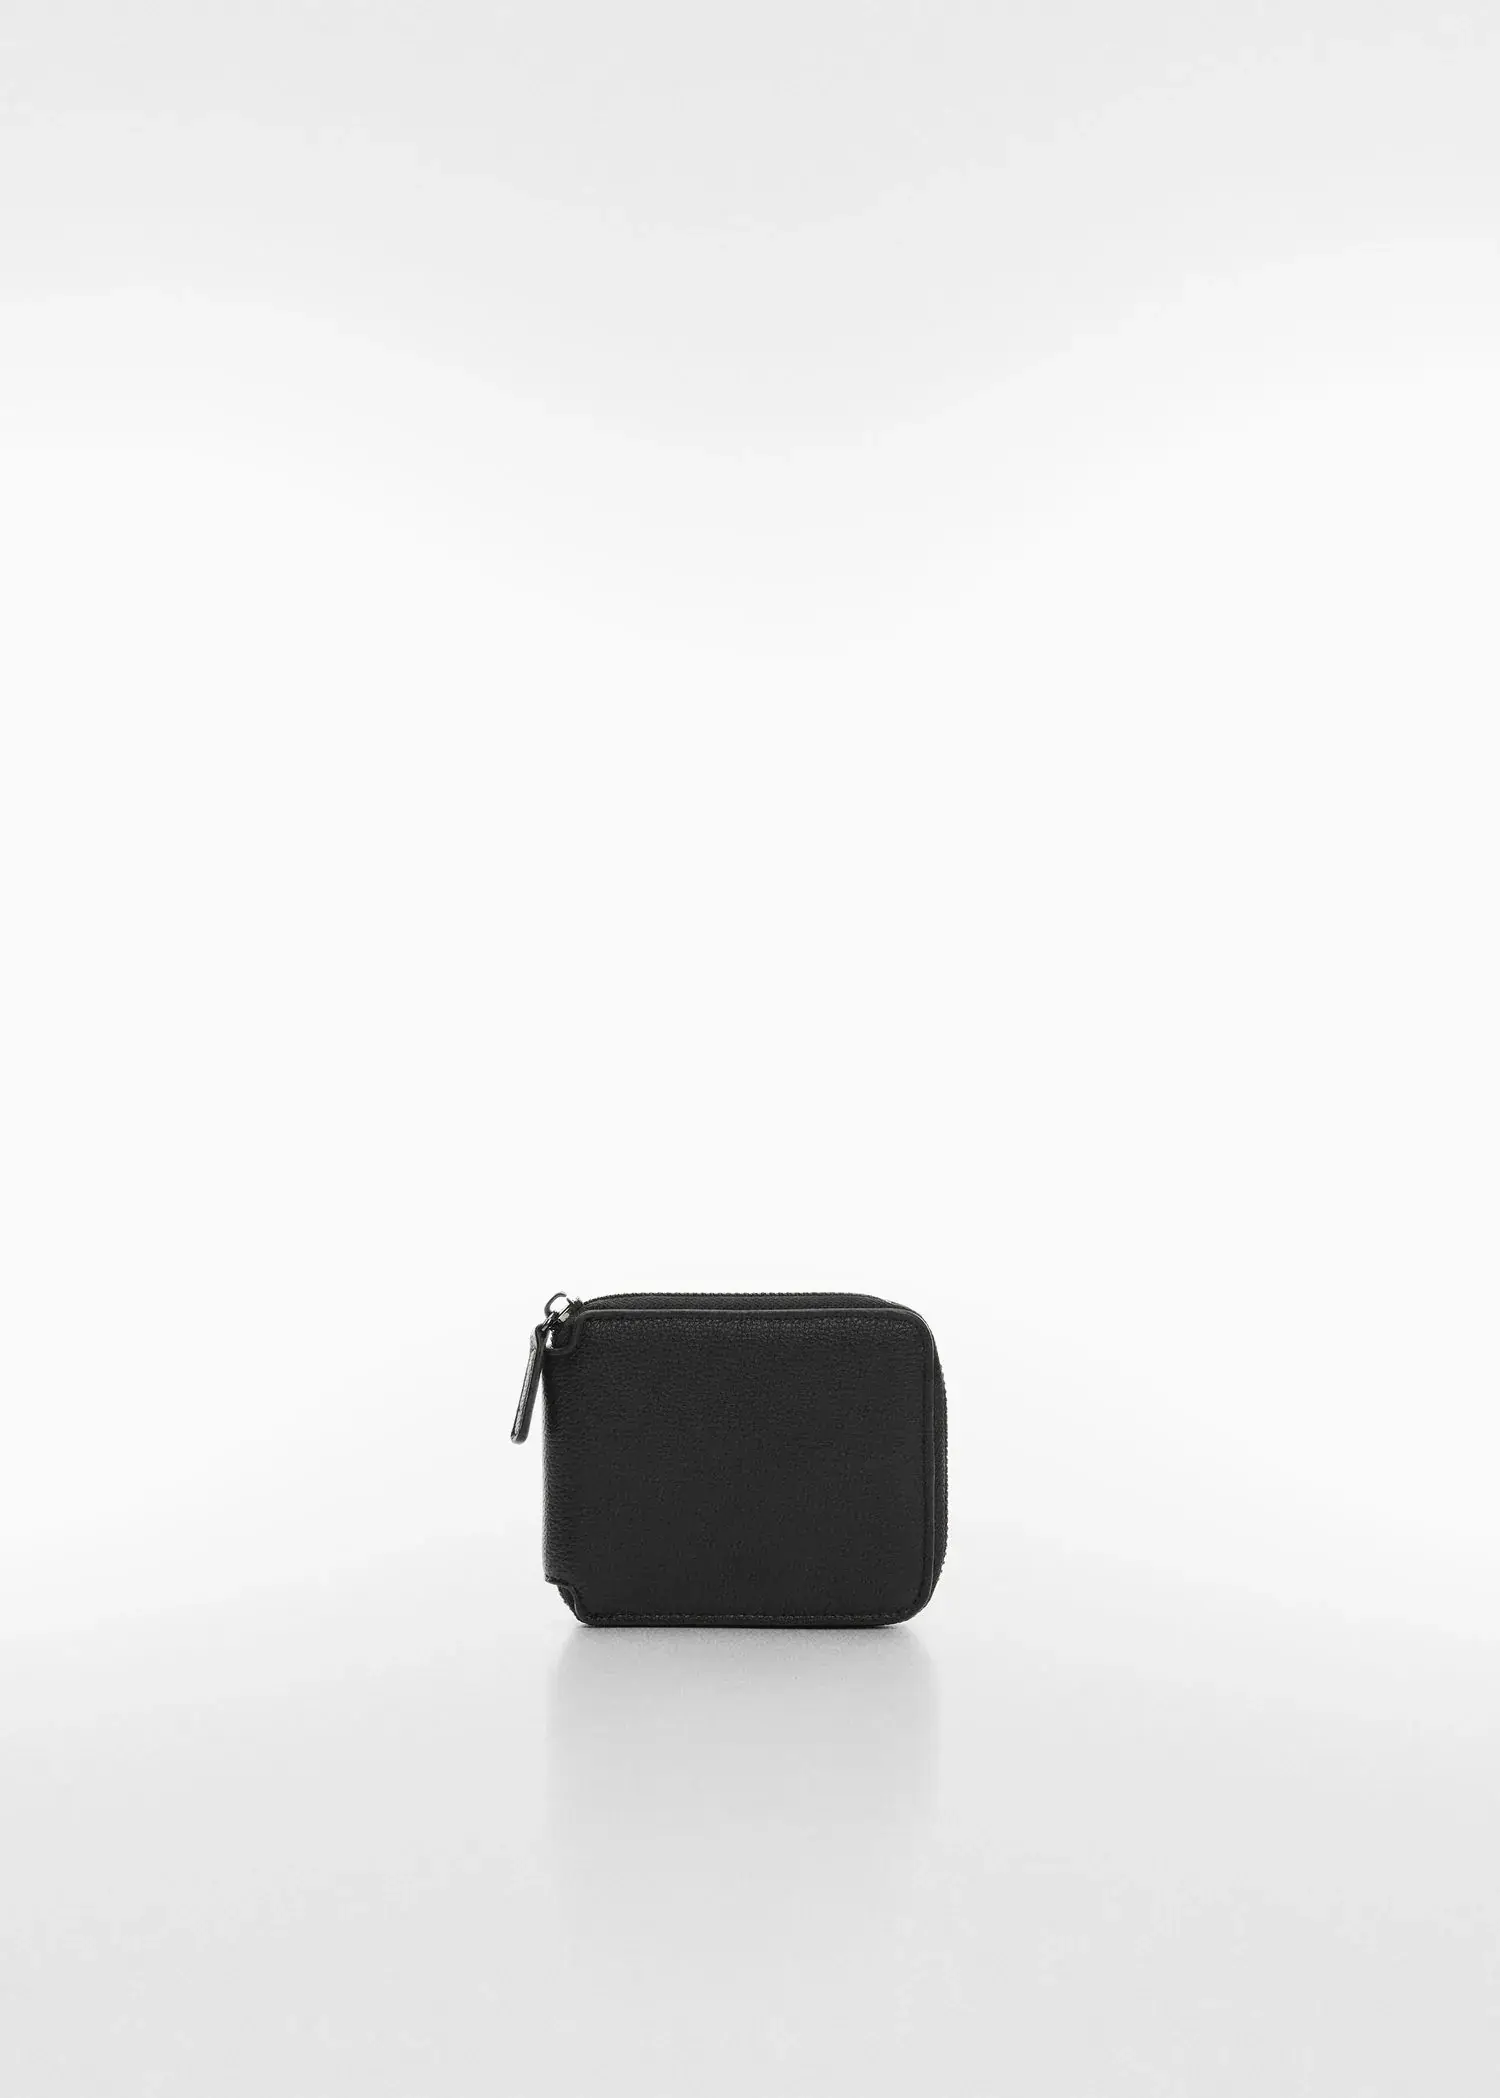 Mango Anti-contactless leather-effect card holder. a black wallet sitting on top of a white table. 